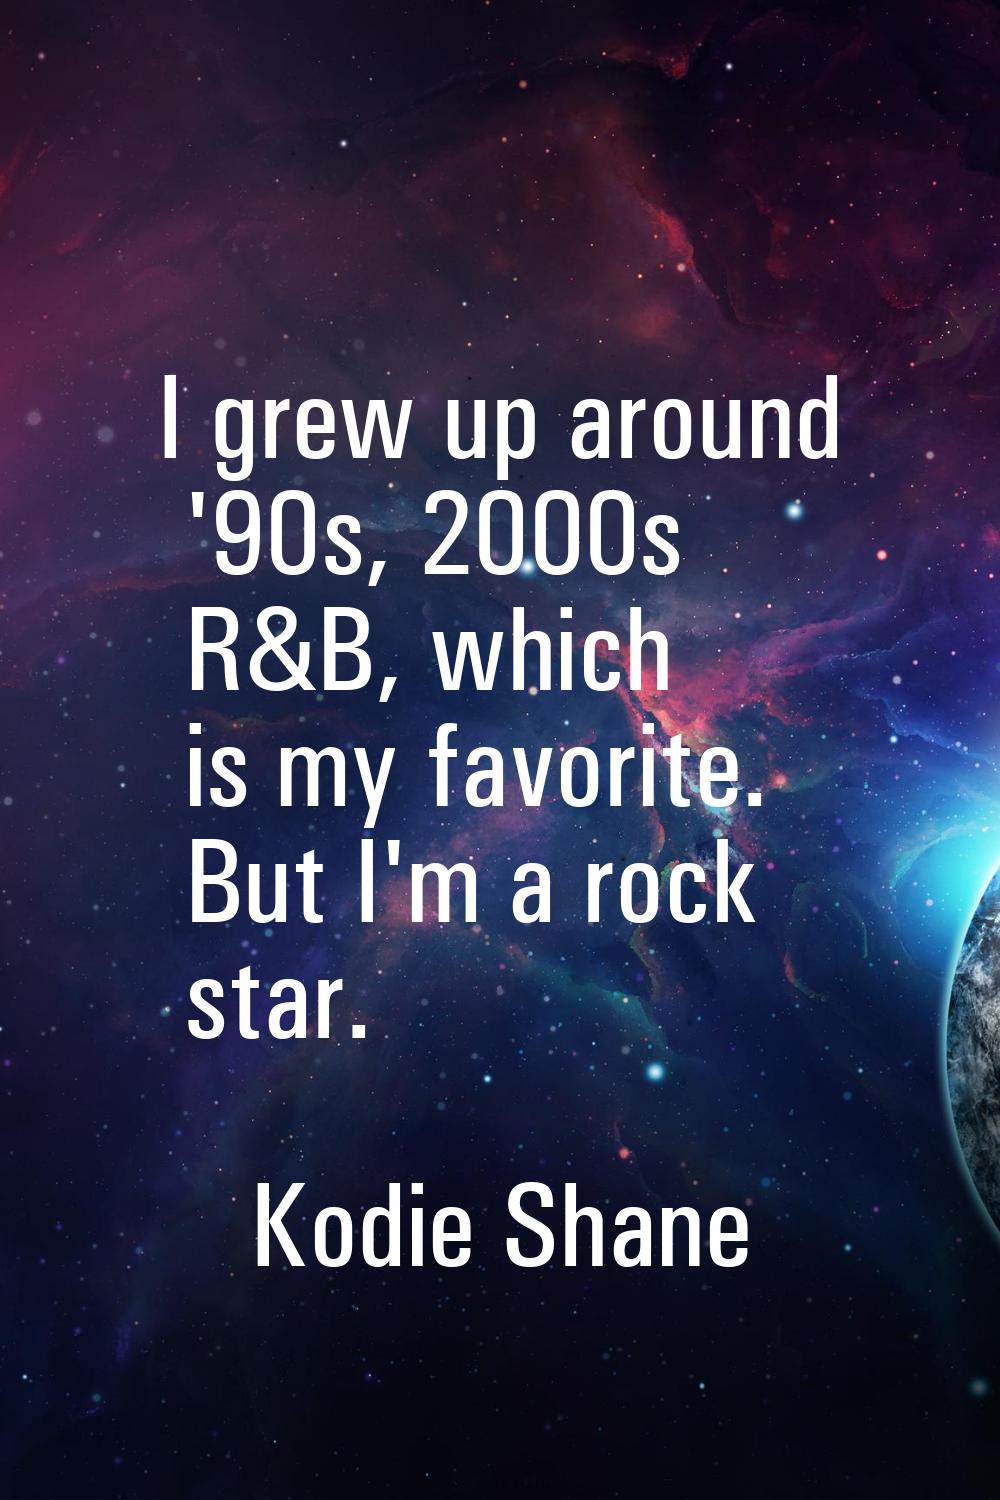 I grew up around '90s, 2000s R&B, which is my favorite. But I'm a rock star.